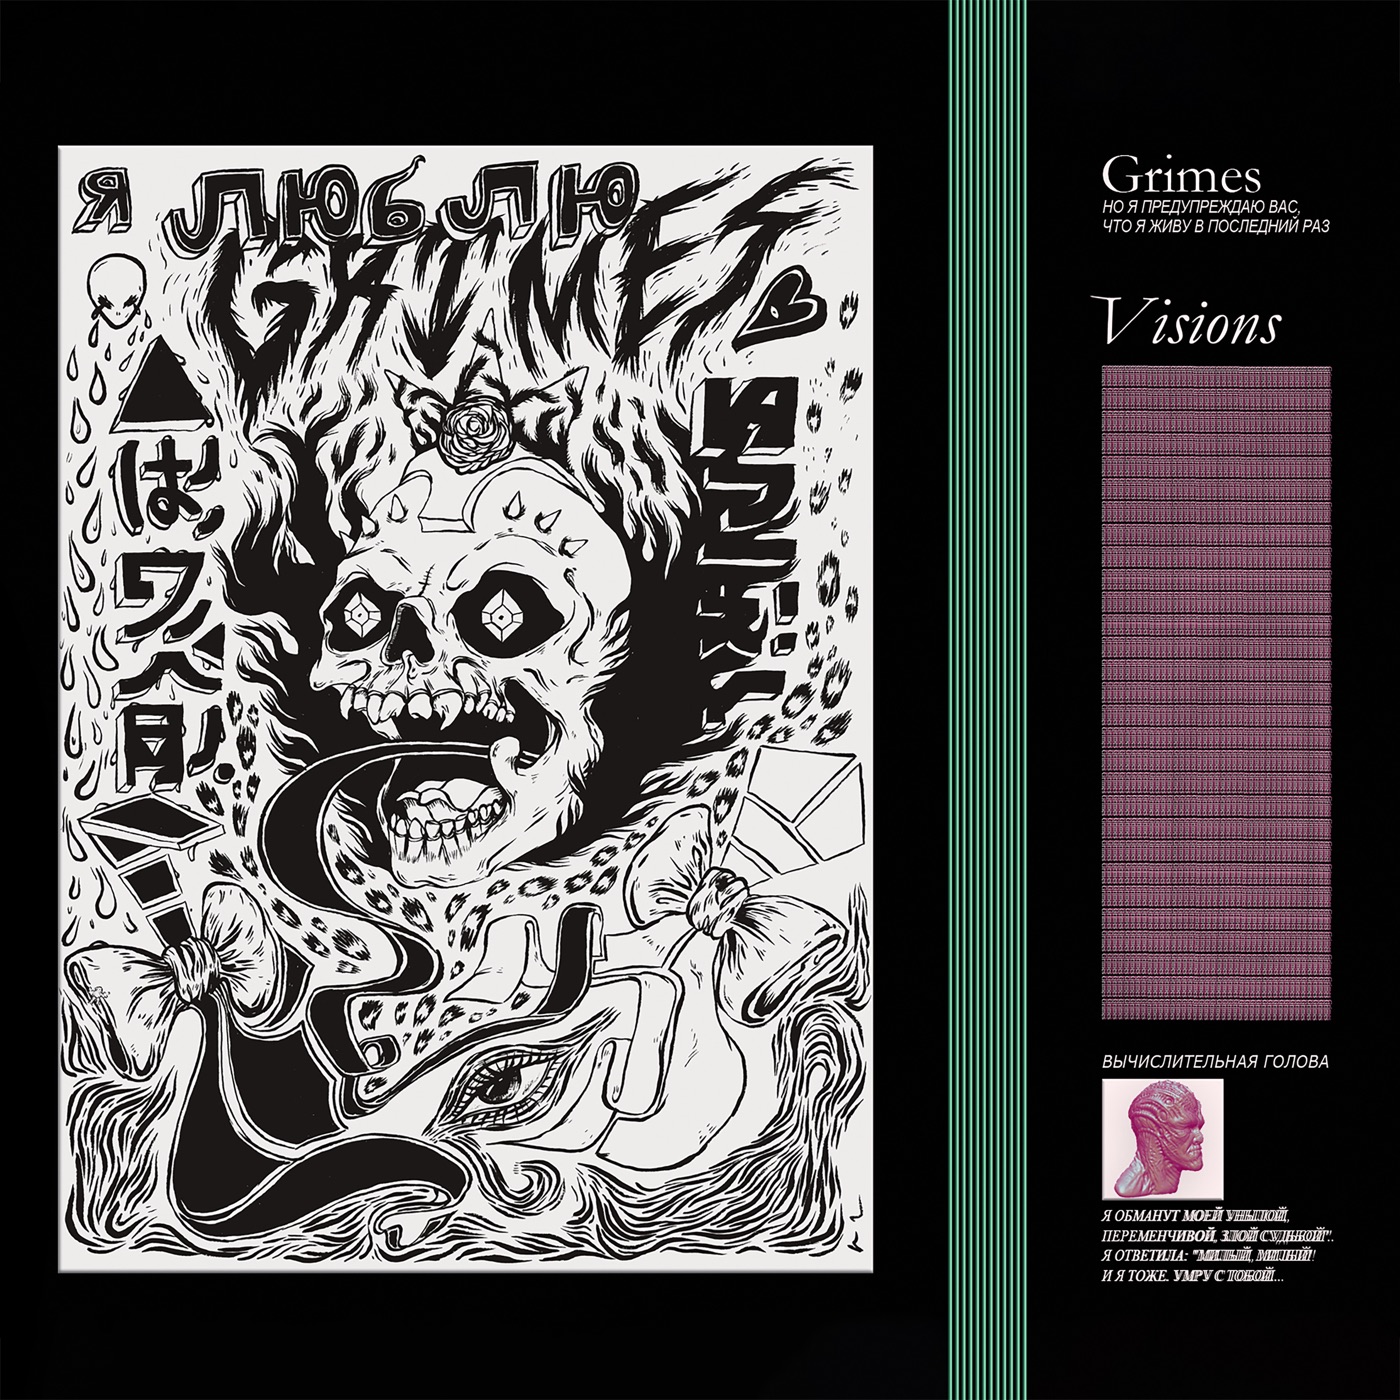 Visions by Grimes